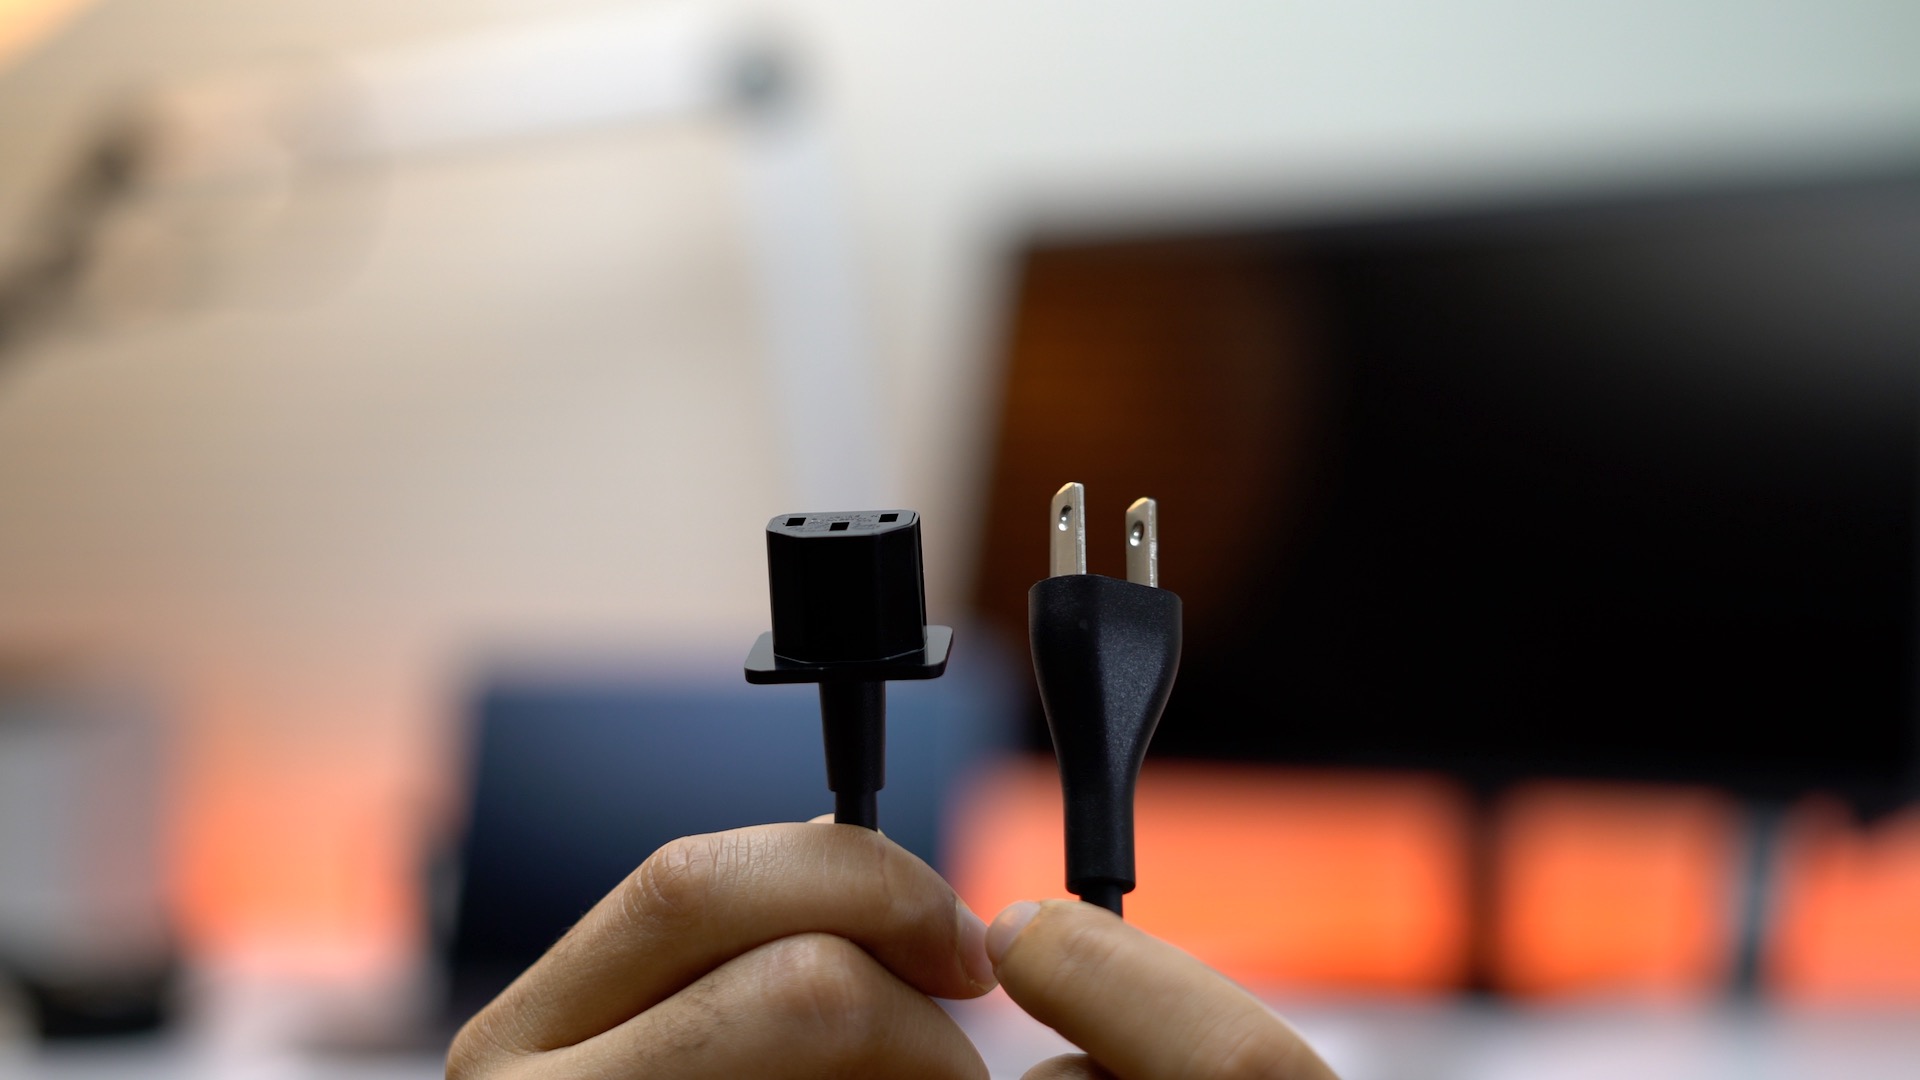 lg-ultrafine-5k-display-power-cable